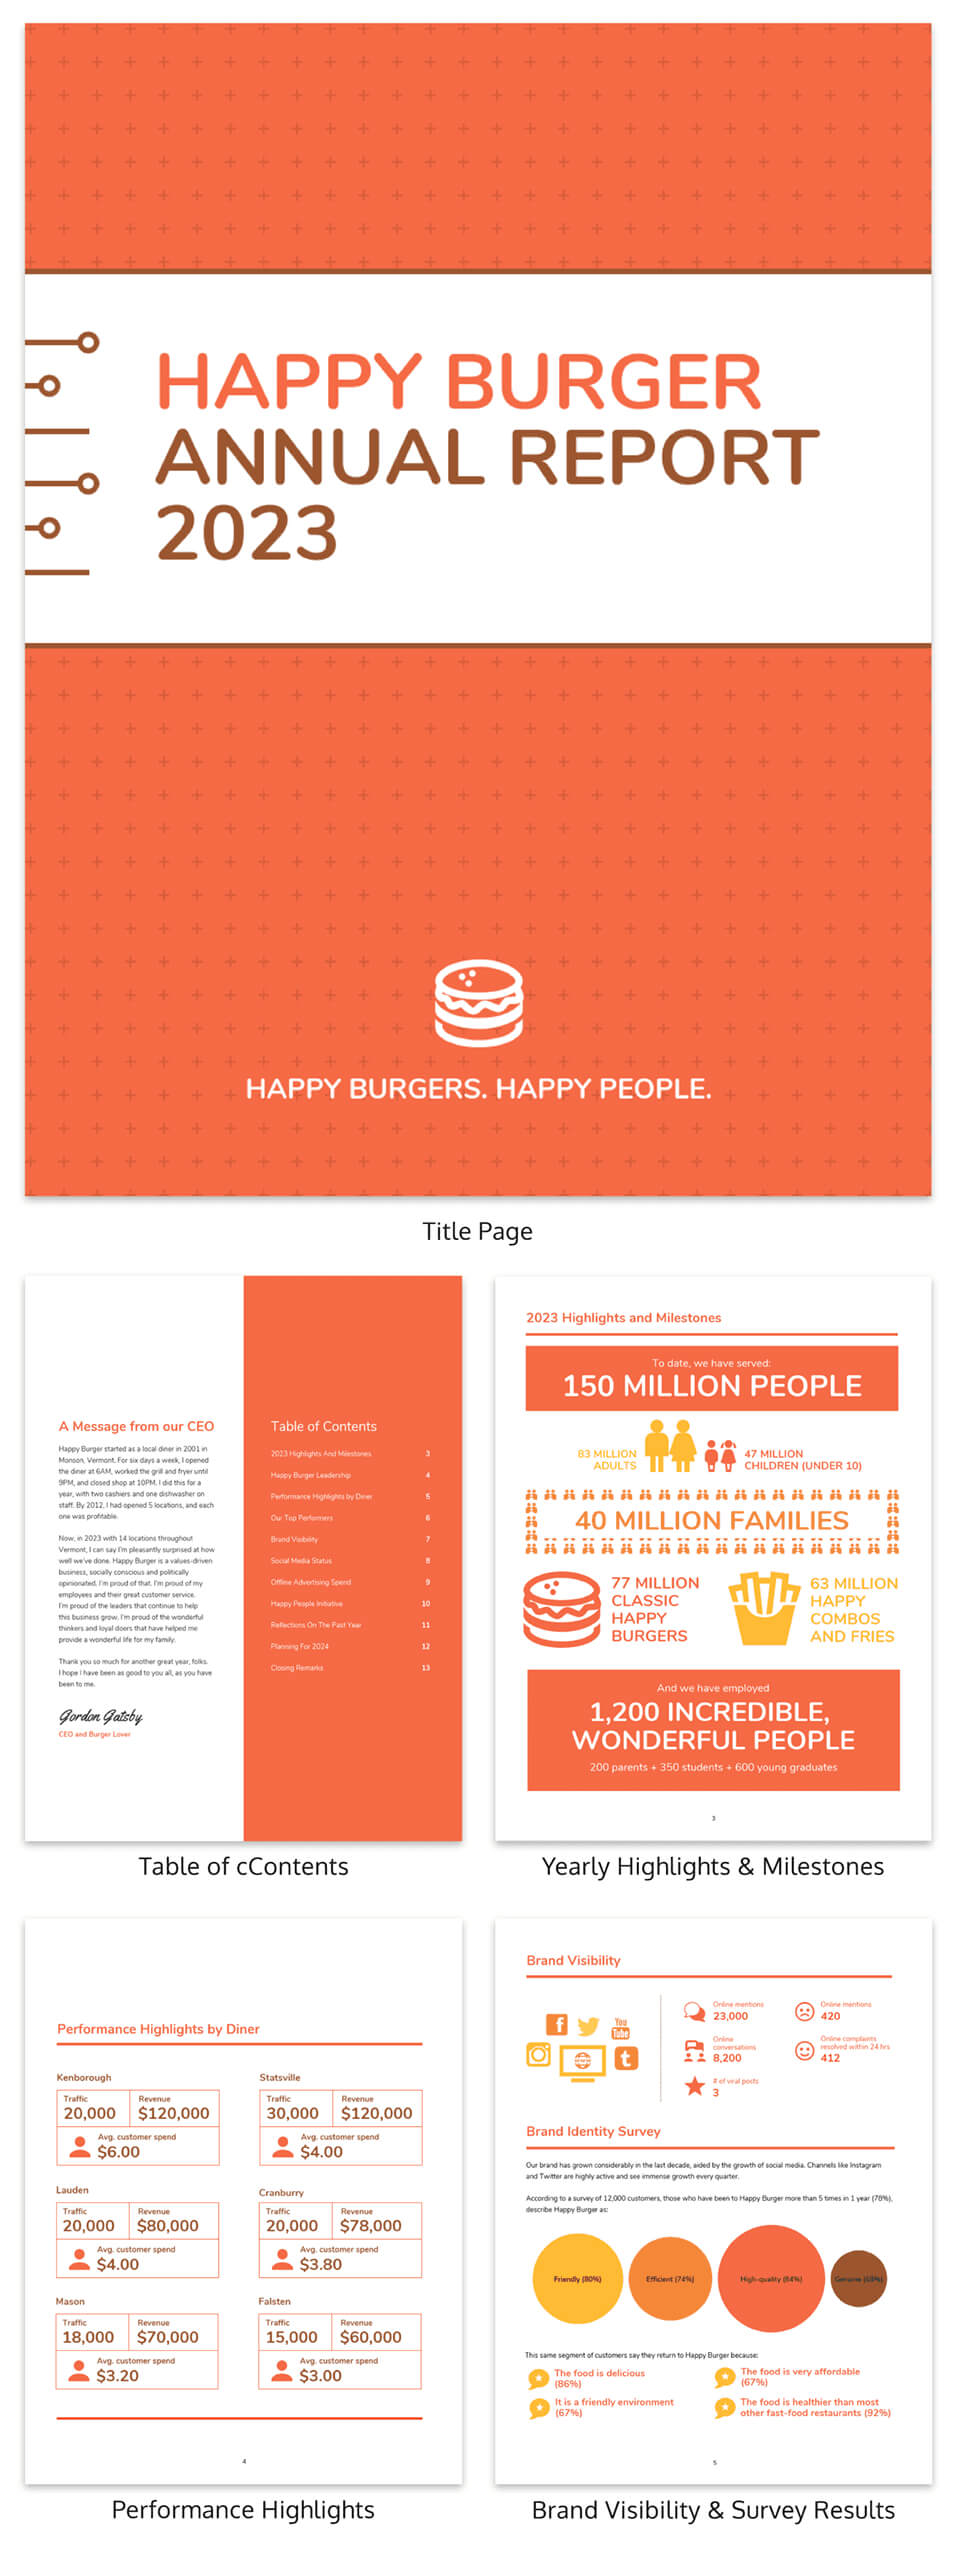 55+ Customizable Annual Report Design Templates, Examples & Tips For Wrap Up Report Template